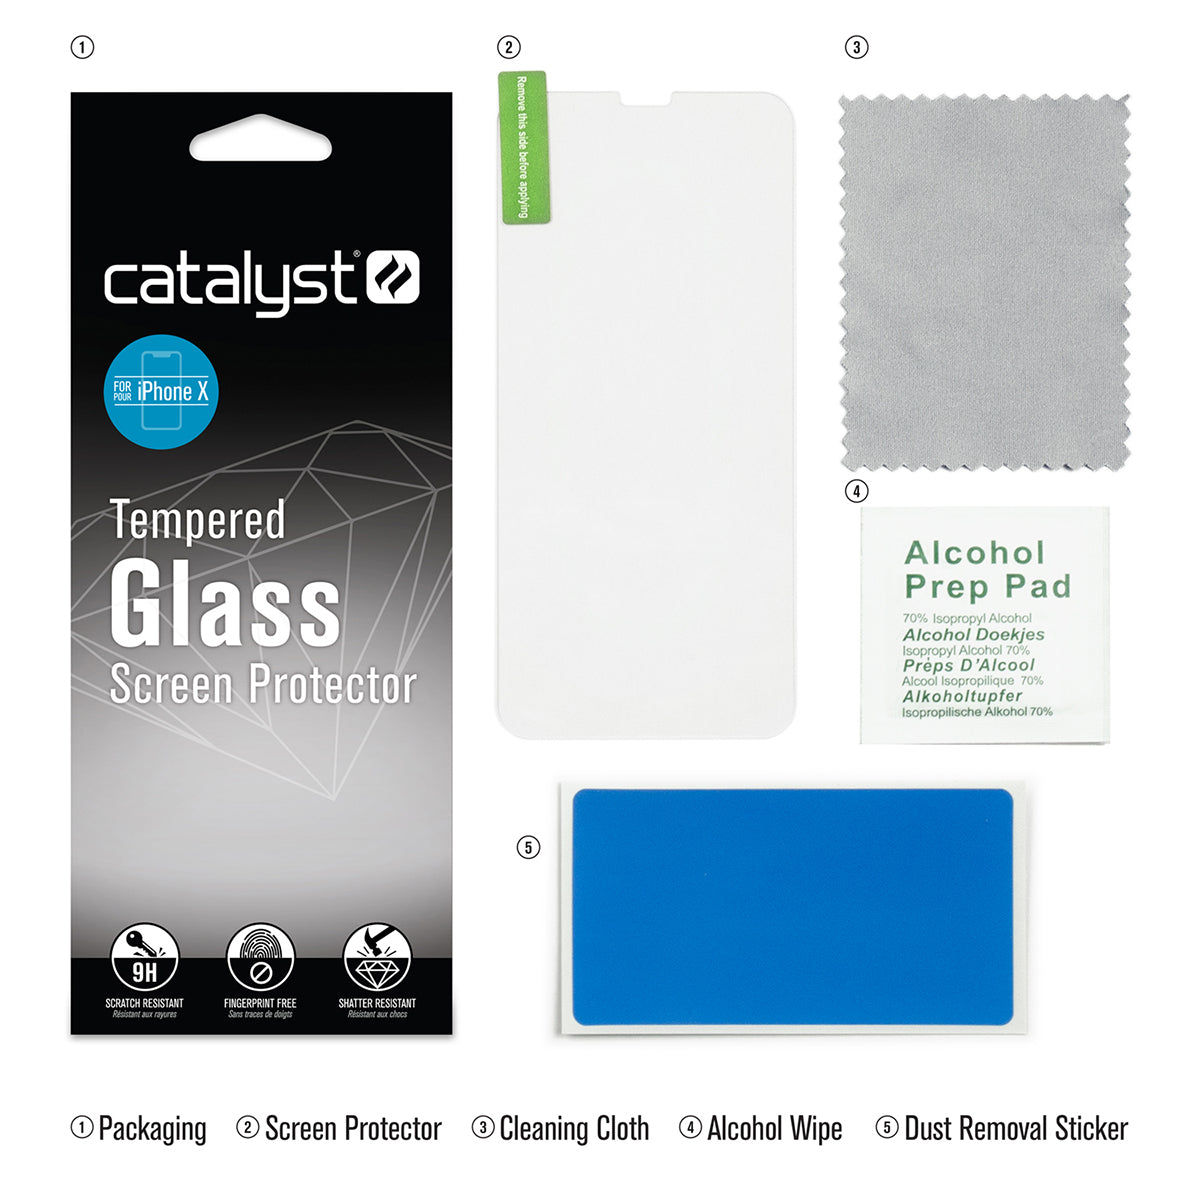 Catalyst Add a Tempered Glass Screen Protector for iphone X XR Xs XsMax inside the box includes packaging screen protector cleaning cloth alcohol wipe dust removal sticker text reads packaging screen protector cleaning cloth alcohol wipe dust removal sticker alcohol prep pad